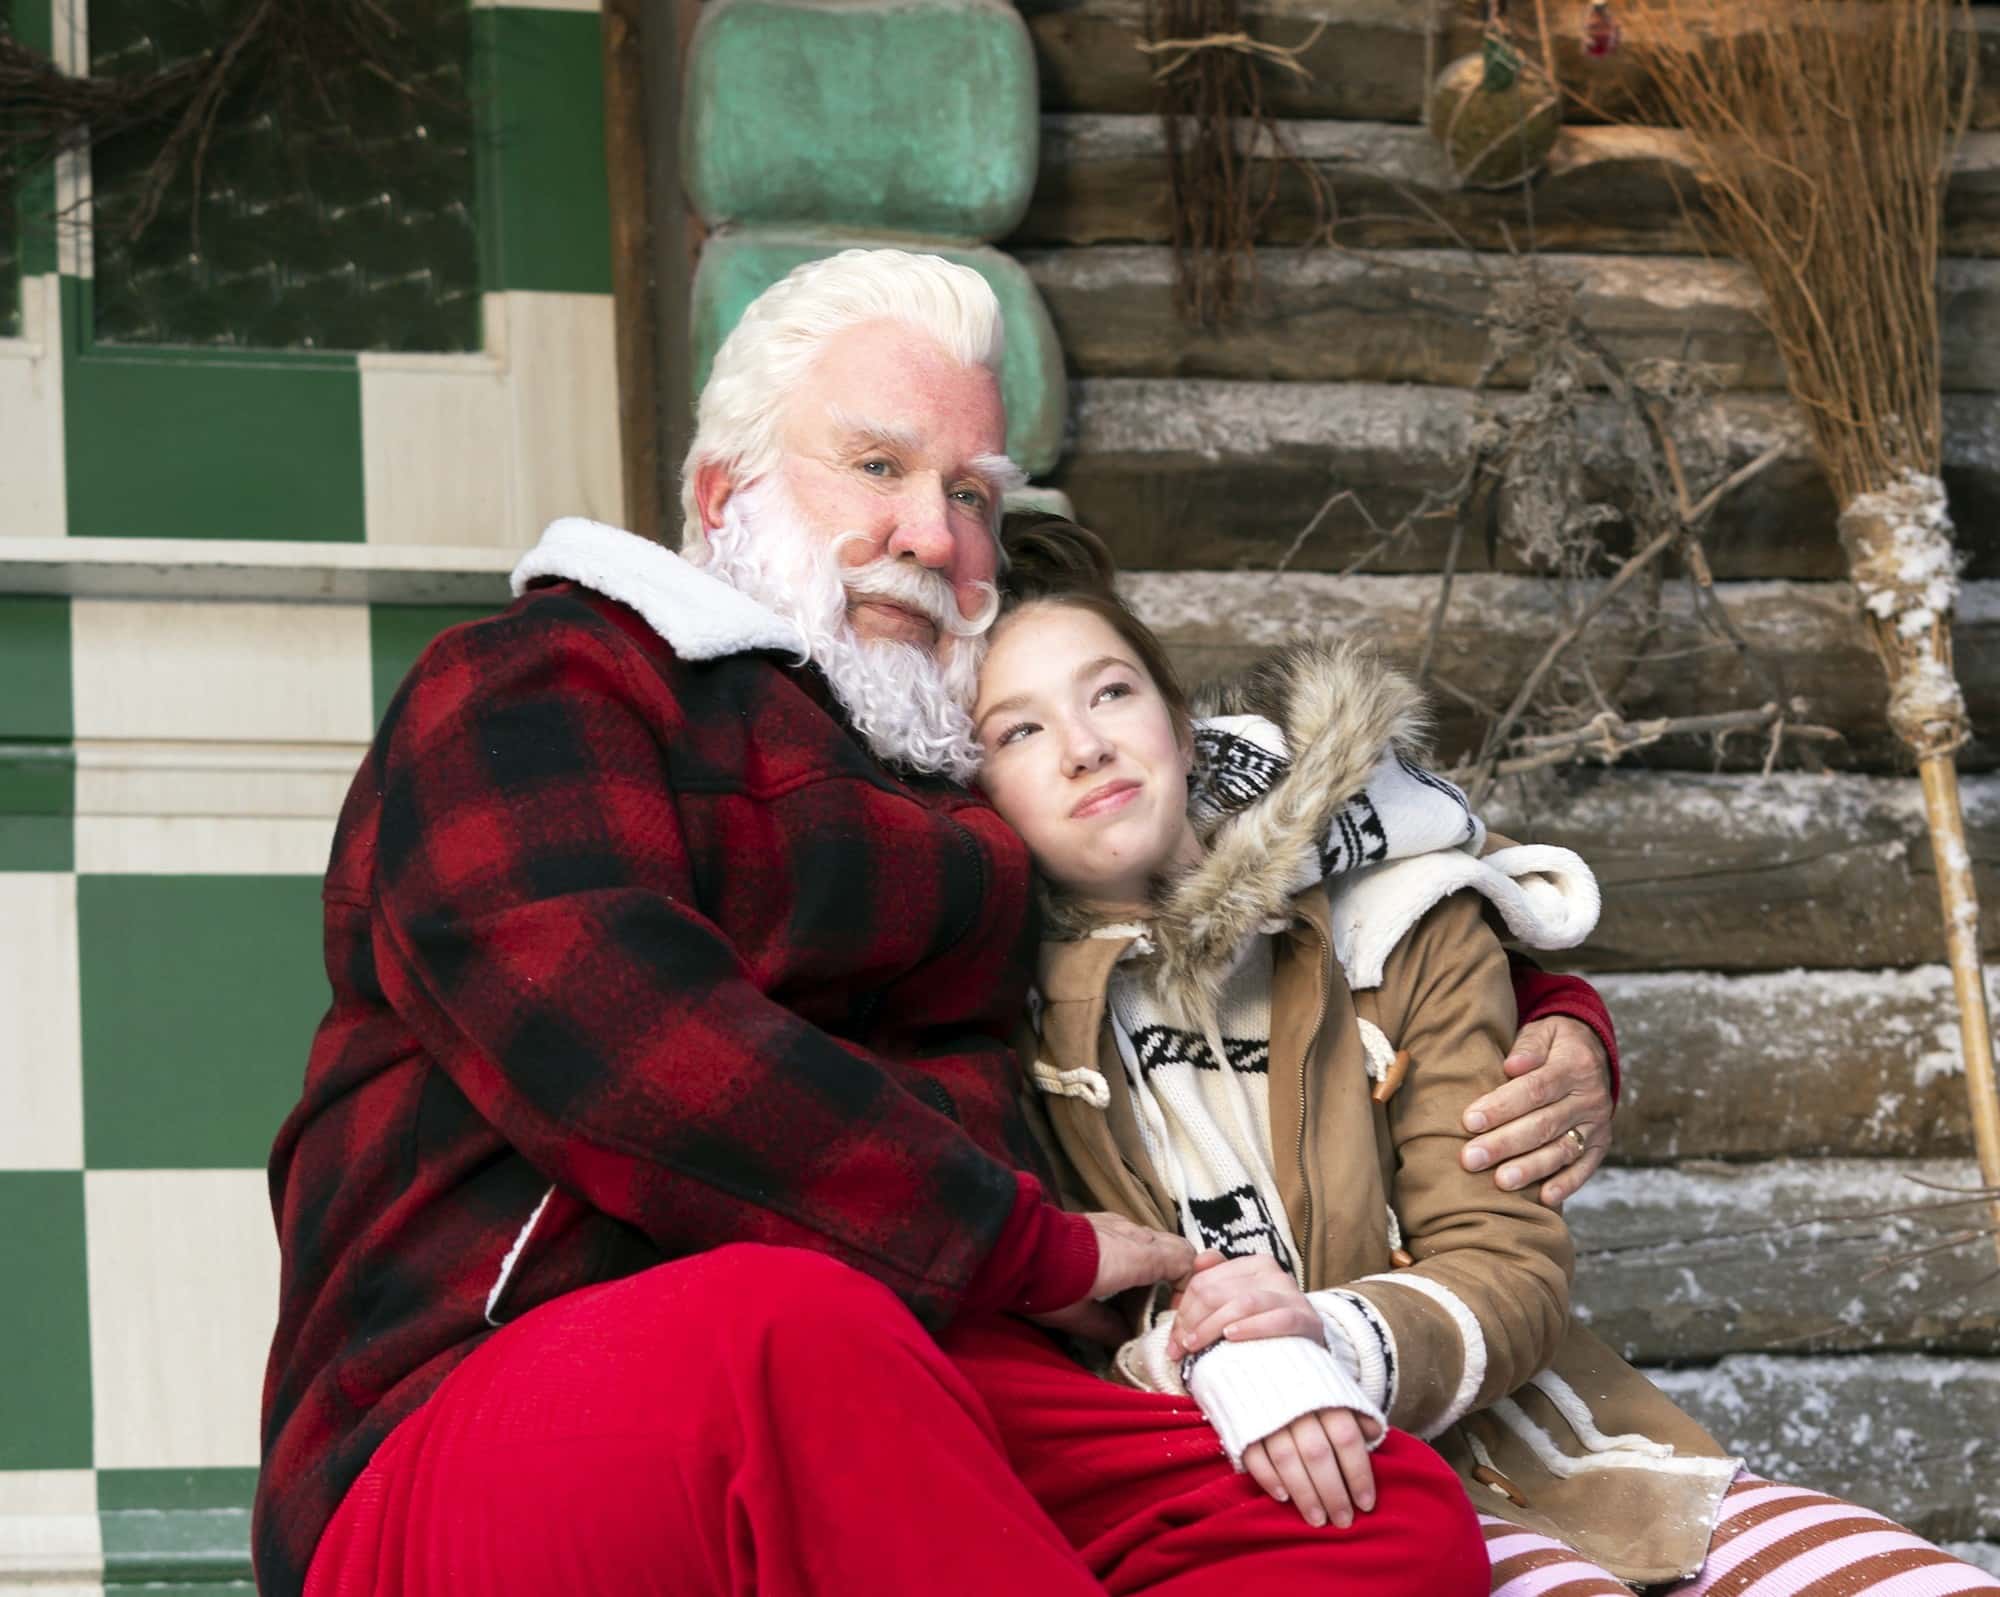 THE SANTA CLAUSES, from left: Tim Allen, Elizabeth Allen-Dick, 'Chapter Three: Into the Wobbly Woods' 